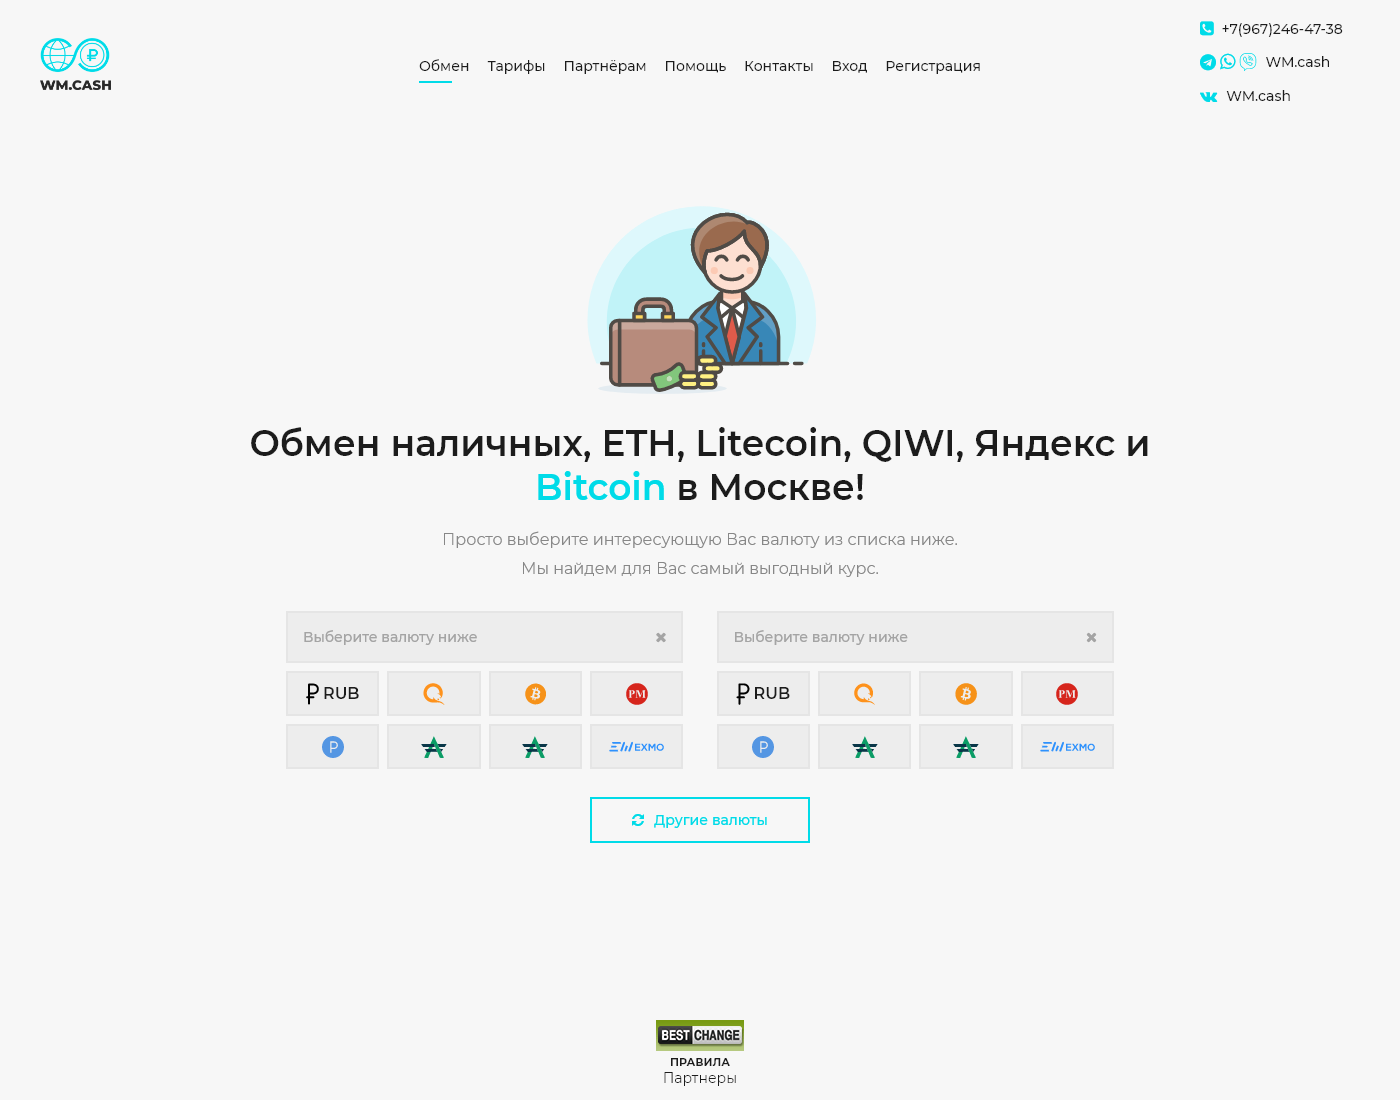 AllWm user interface: the home page in English